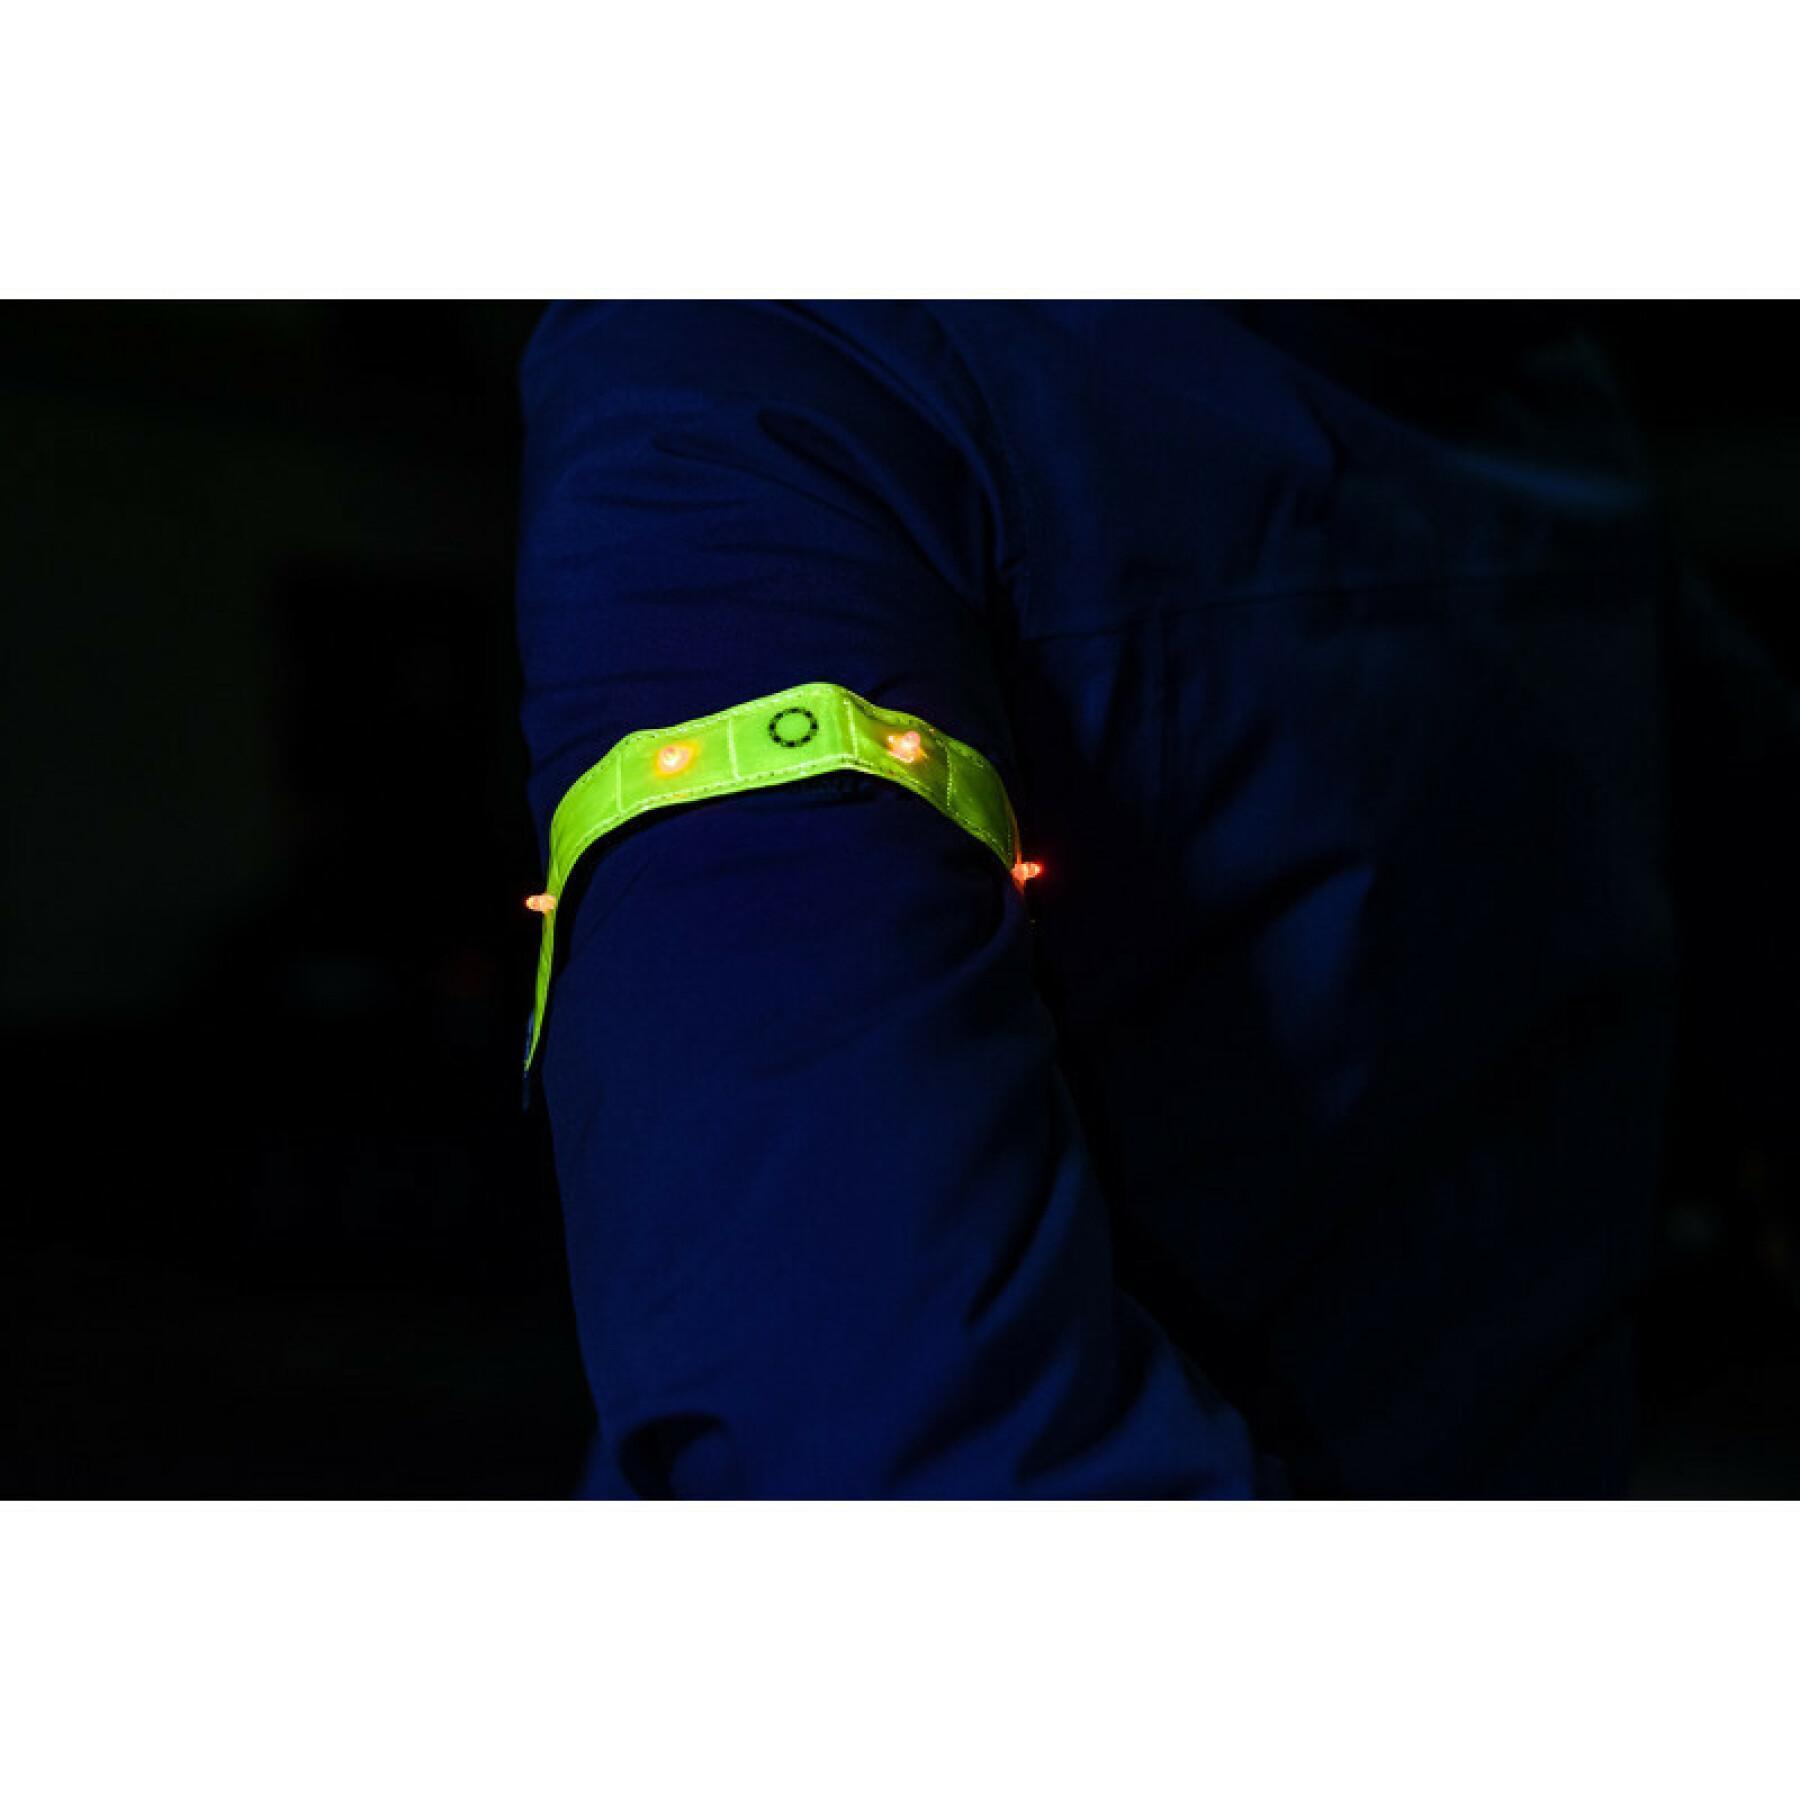 Reflective armband with red led Wowow